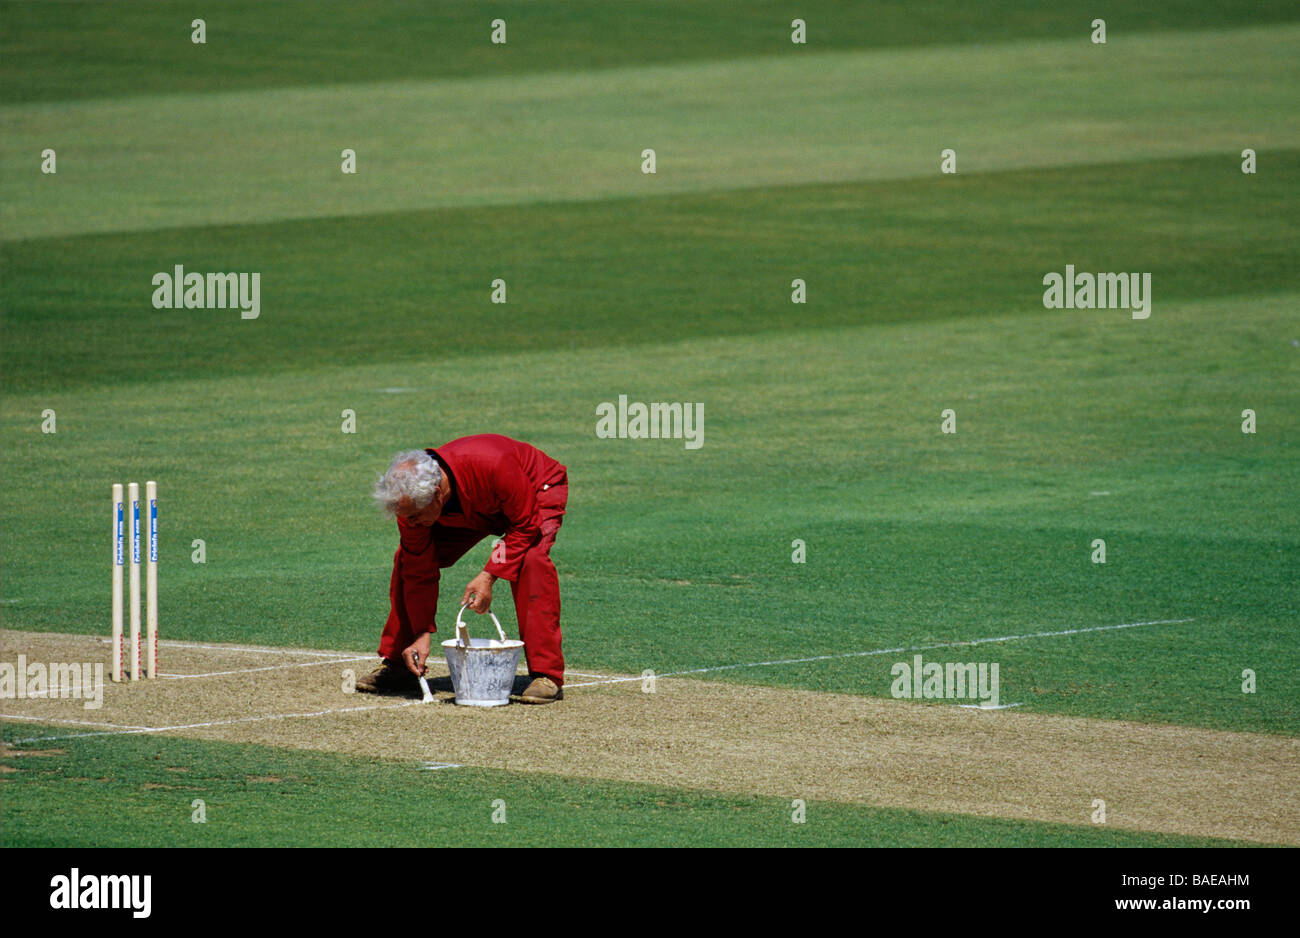 A groundsman white lining the crease at the oval cricket ground Stock Photo